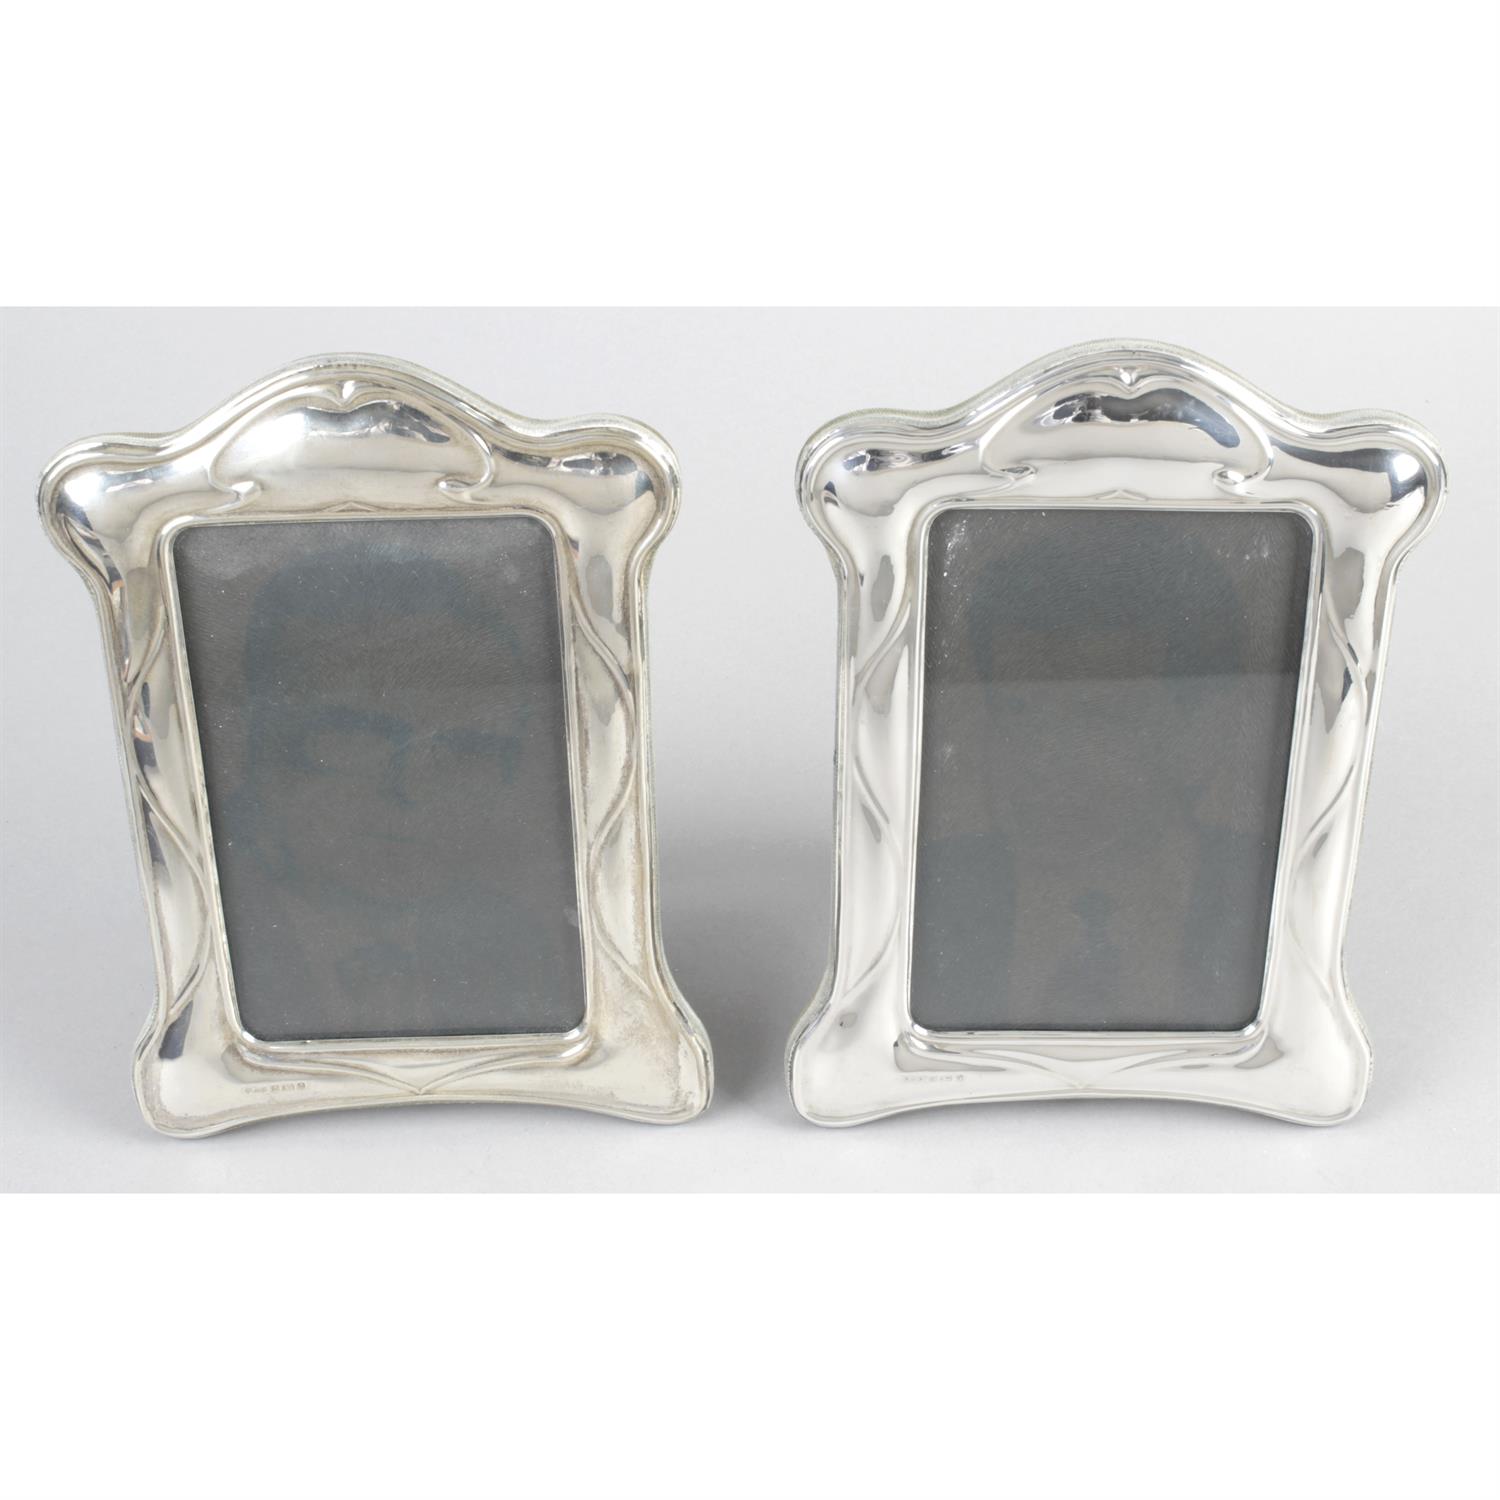 A pair of Art Nouveau style modern silver mounted photograph frames.